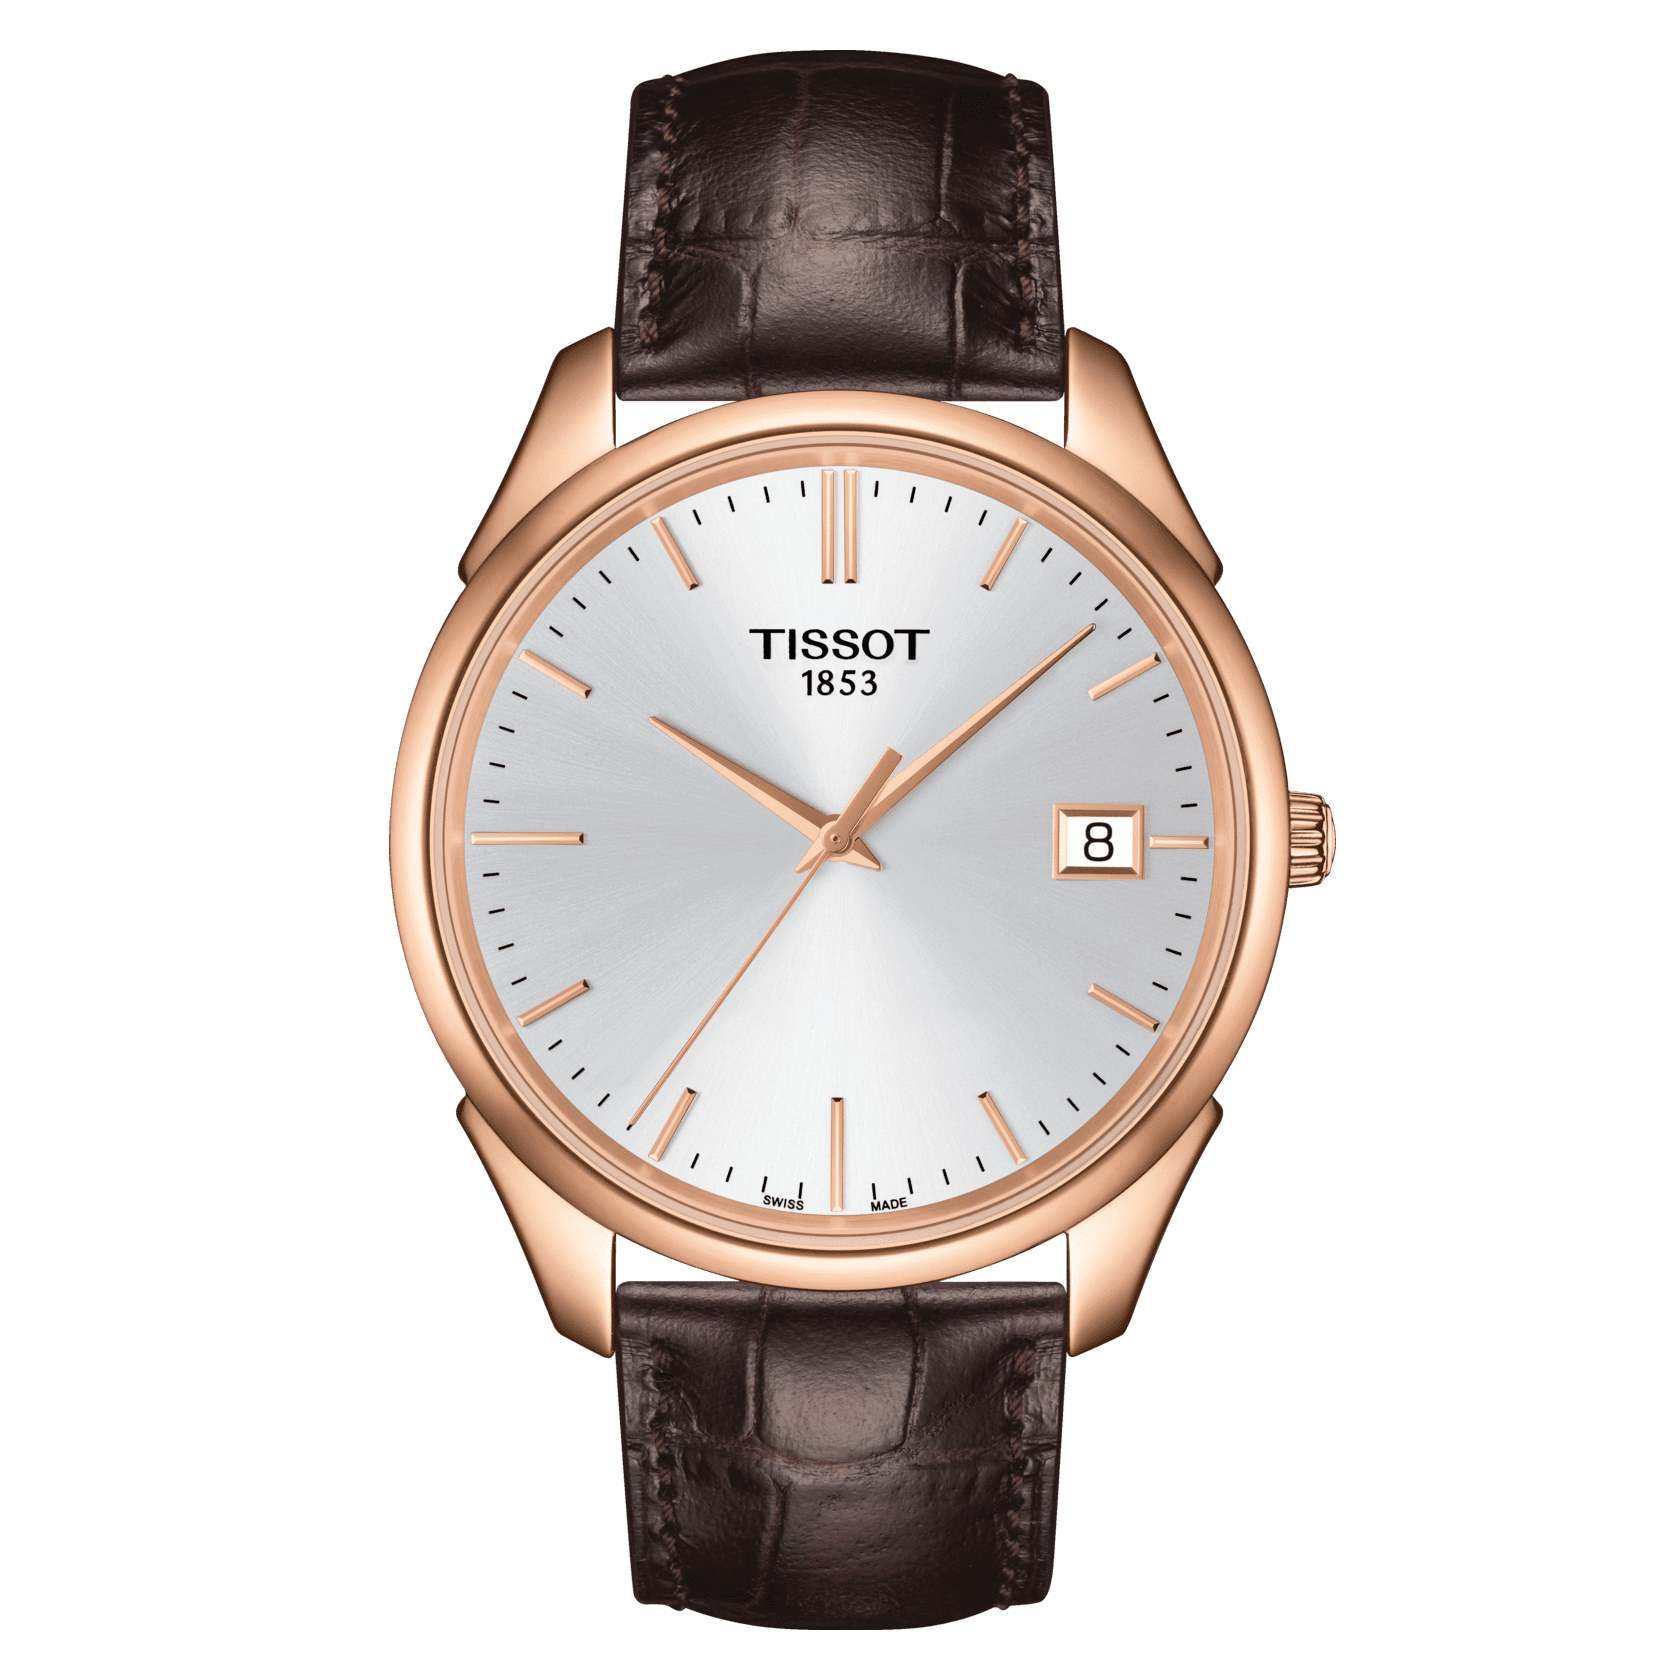 Where To Get Good Fake Tayroc Watches